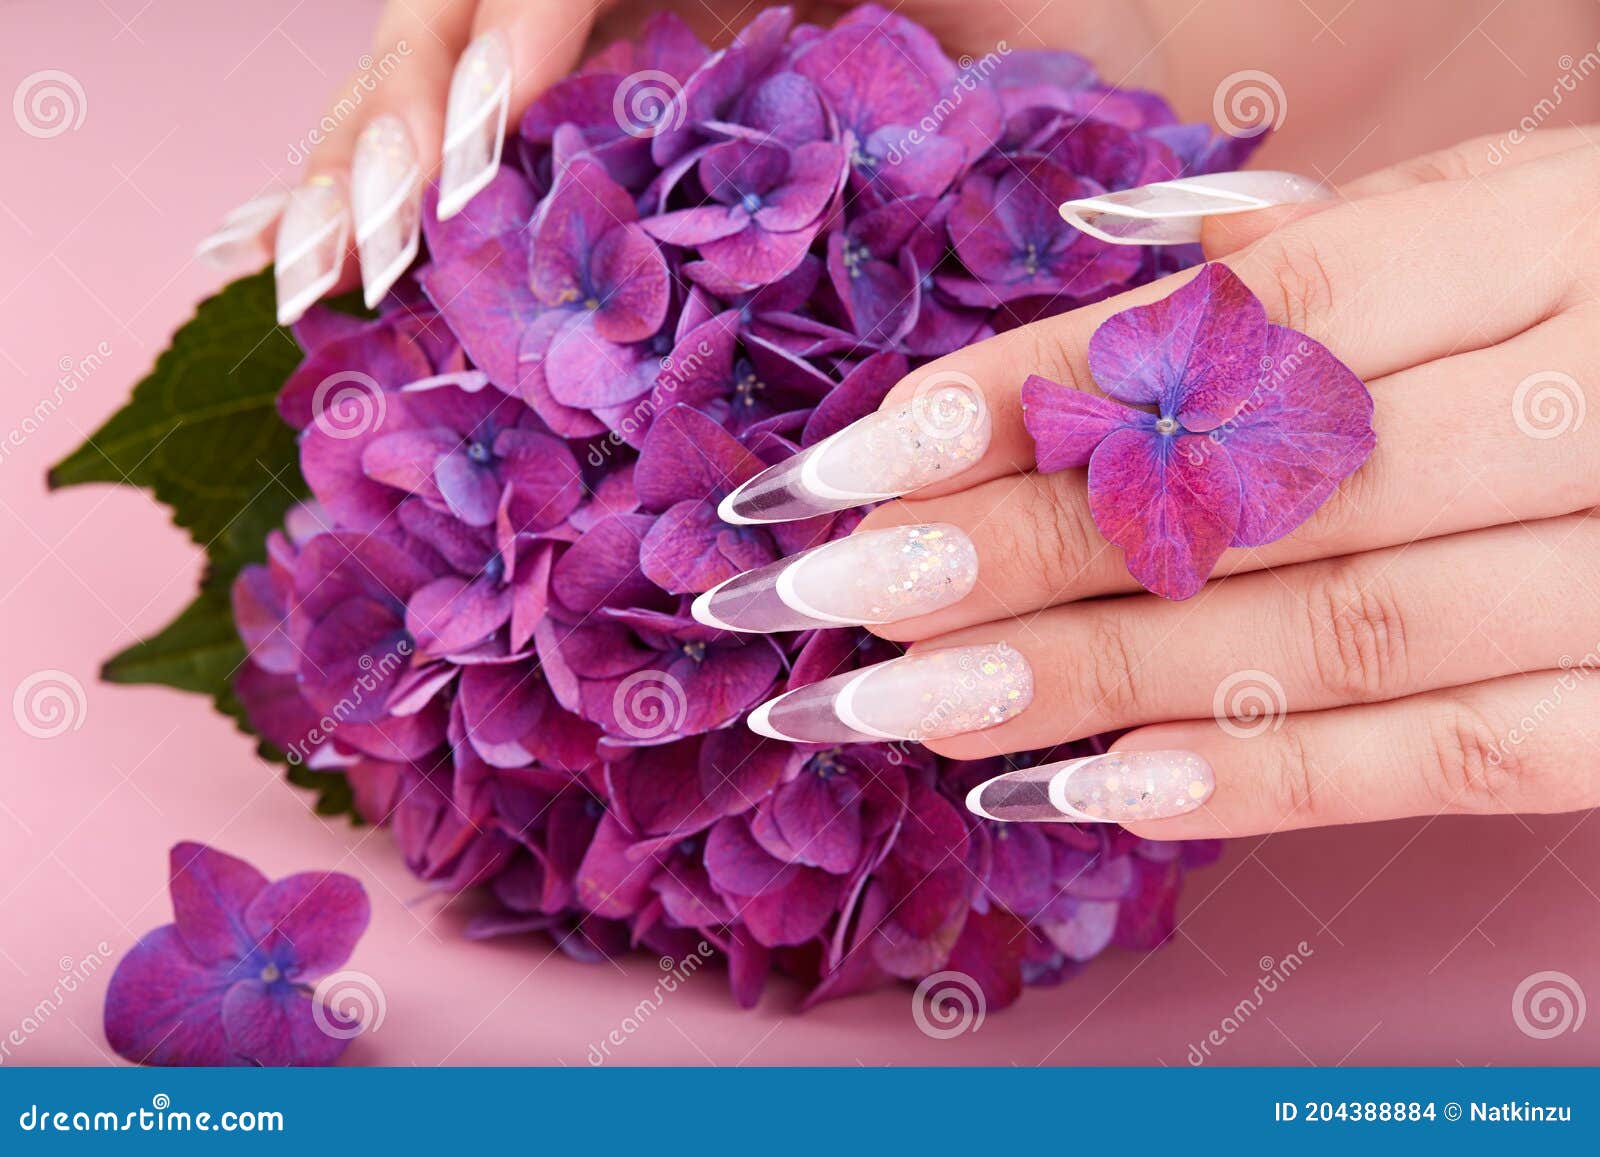 hands with long artificial french manicured nails